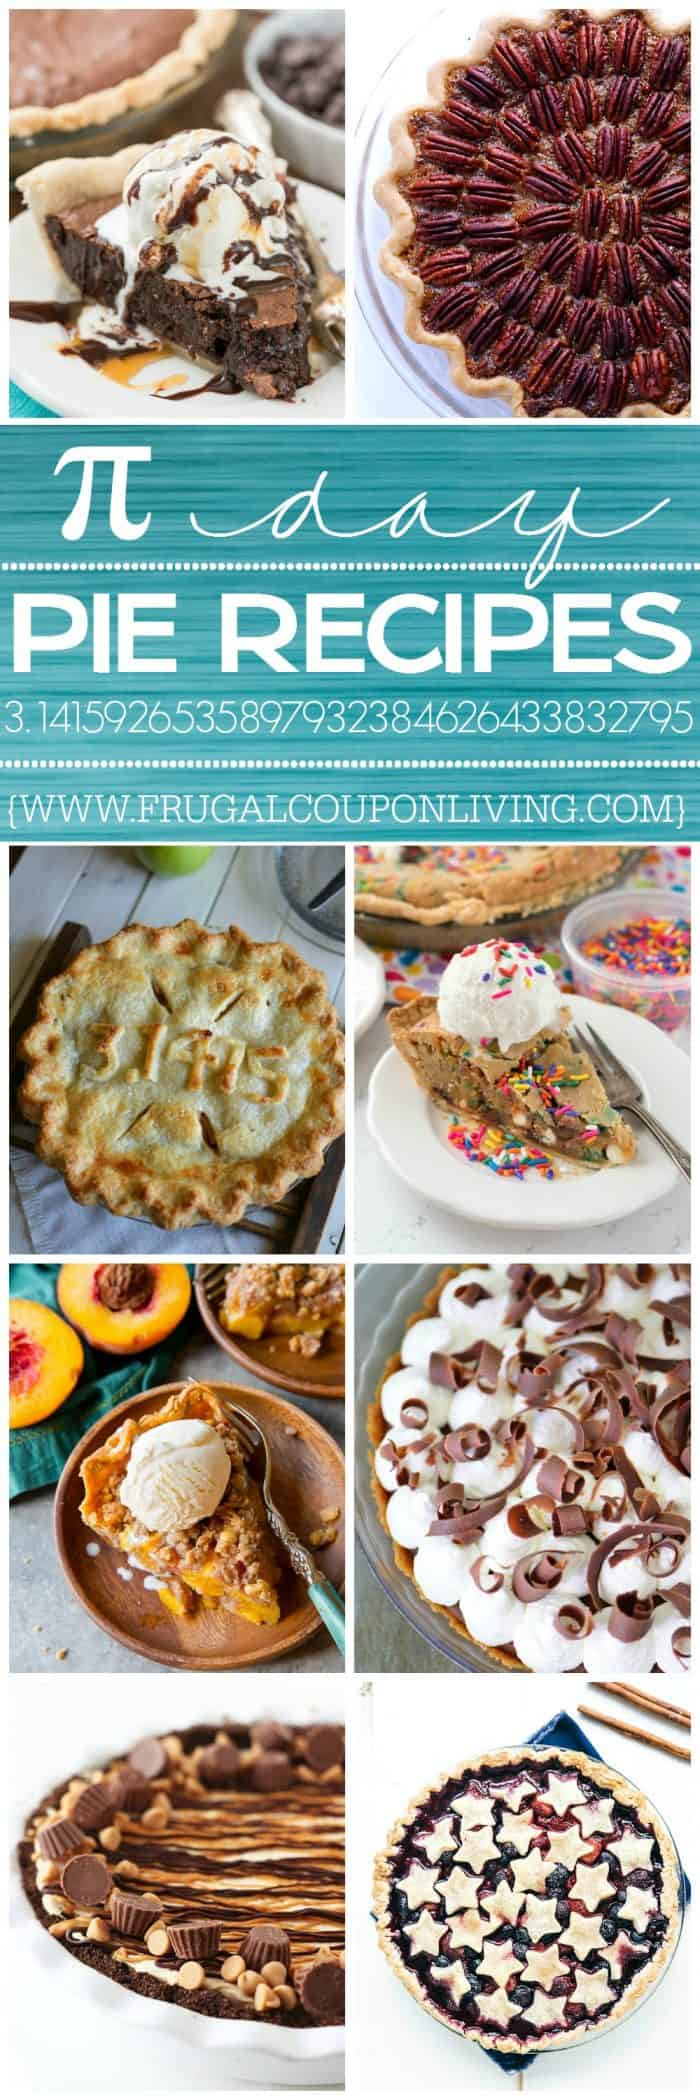 Pi Day Dinner Ideas
 Pi Day Recipes Pie Ideas for March 14th